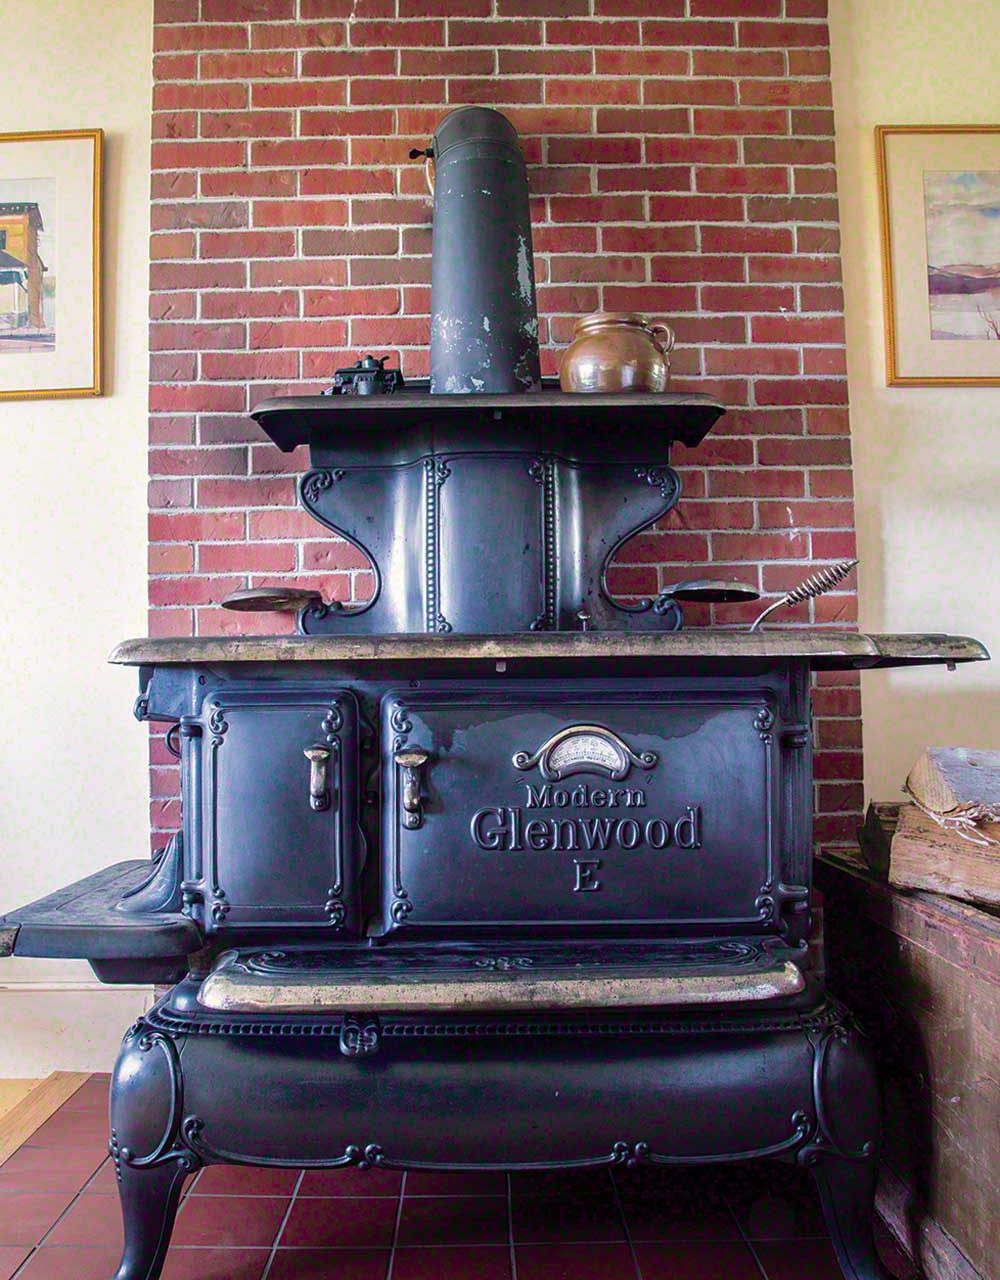 Cooking on a 100-Year-Old Wood Stove Made Me a Better Cook